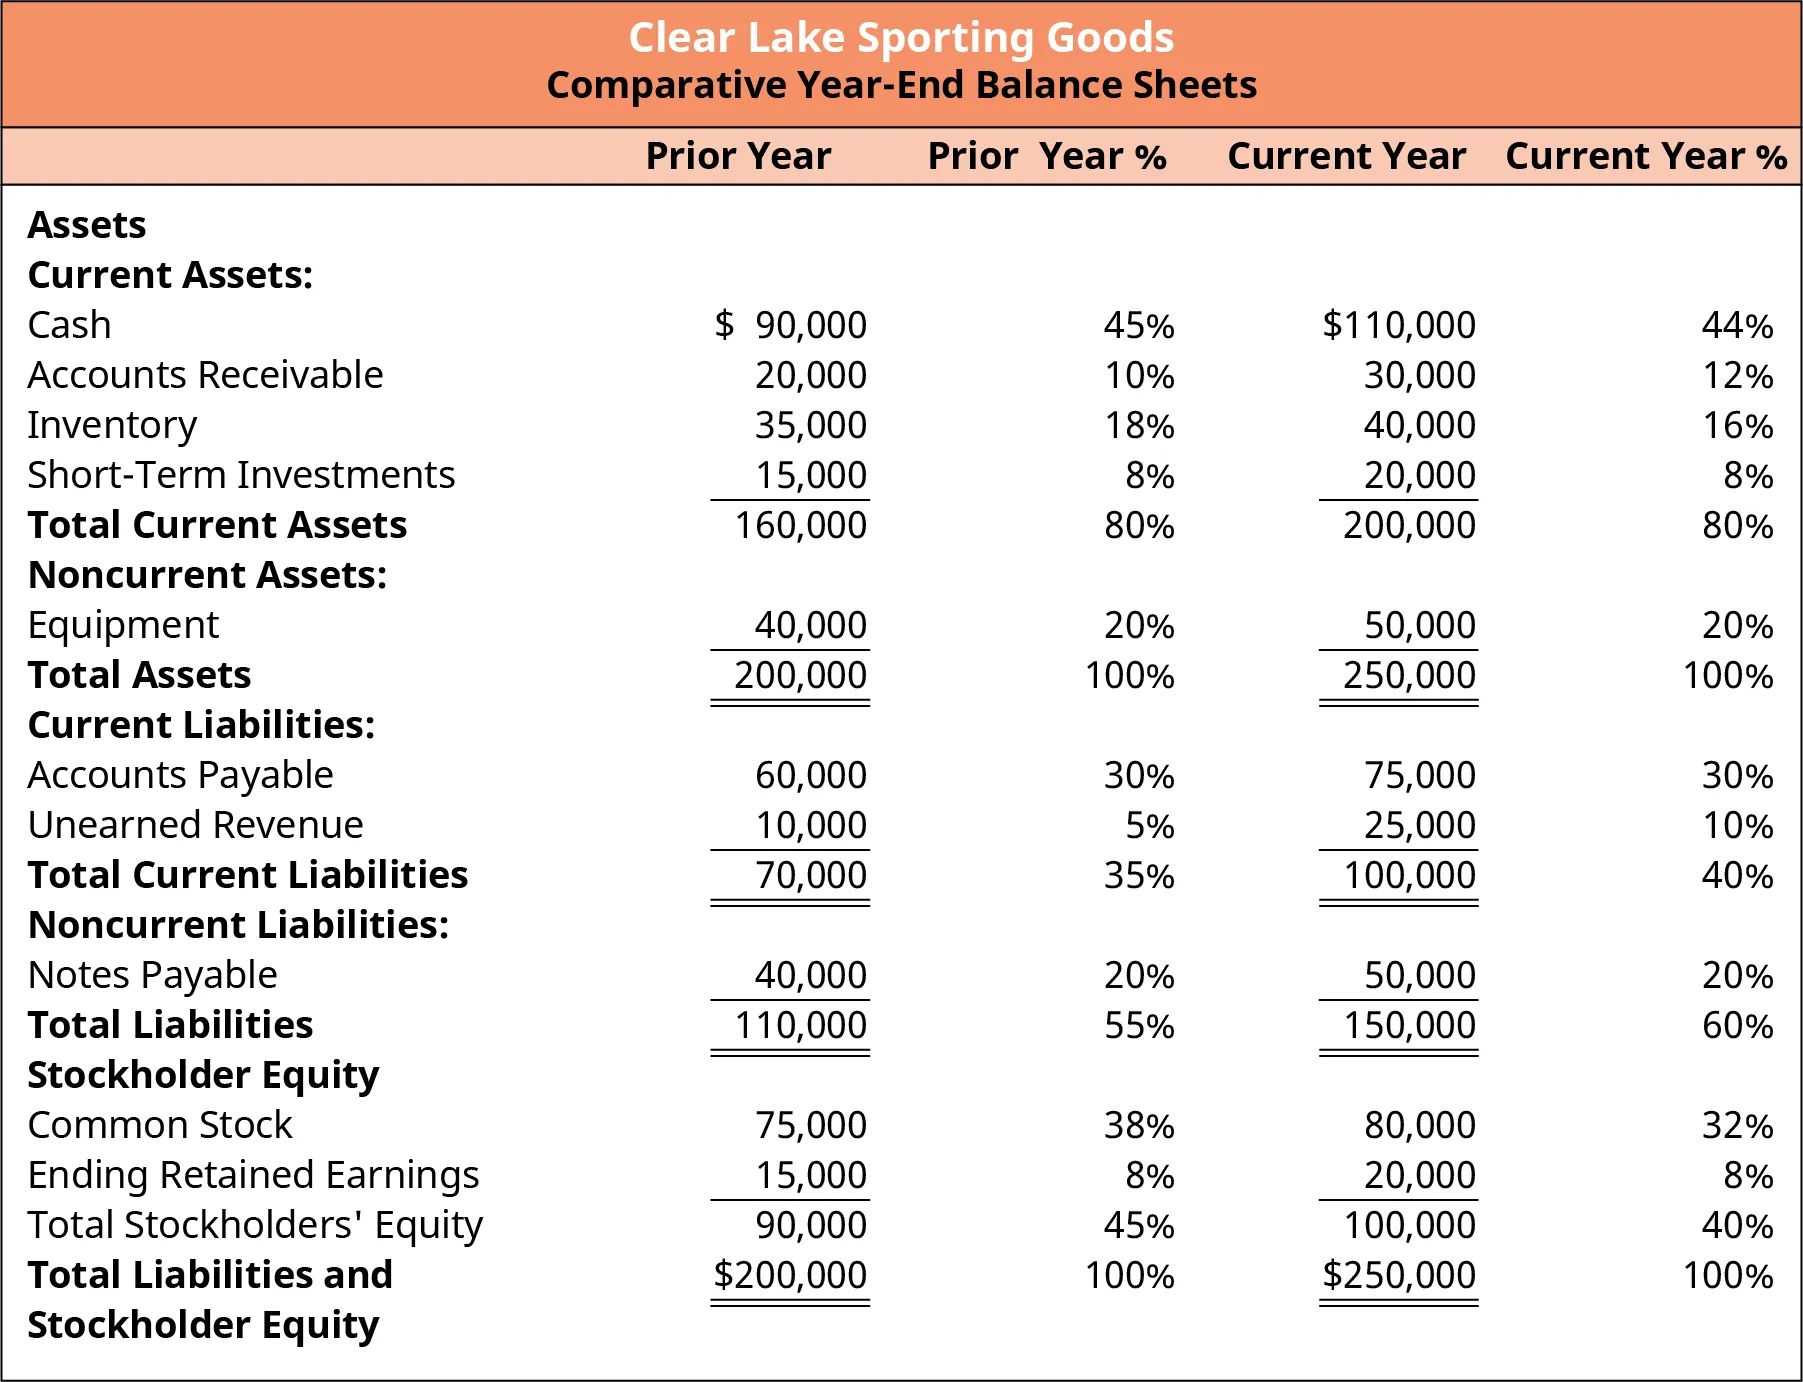 Common-Size Balance Sheet for Clear Lake Sporting Goods. For each line item, it shows what percentage of total assets and total liabilities that line item represents, for the prior and current years. For example, in the prior year, total liabilities were $110,000 or 55%. In the current year, total liabilities were $150,000 or 60%.